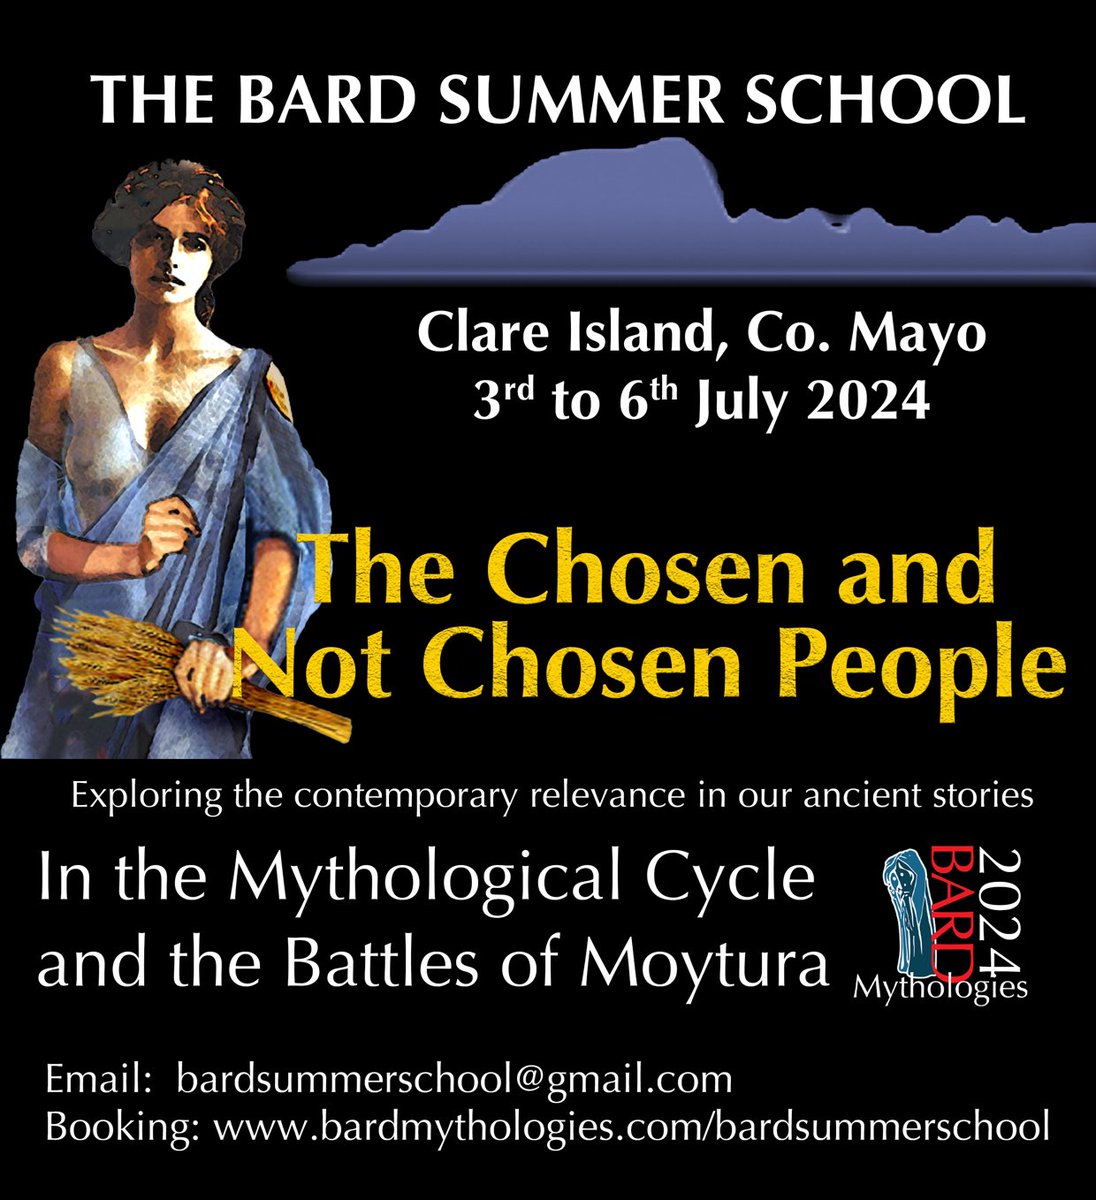 The 27th Annual Bard Summer School on ⁦@Clare_island⁩ promises to be another exciting adventure into the wisdom of the world of our ancient Irish stories